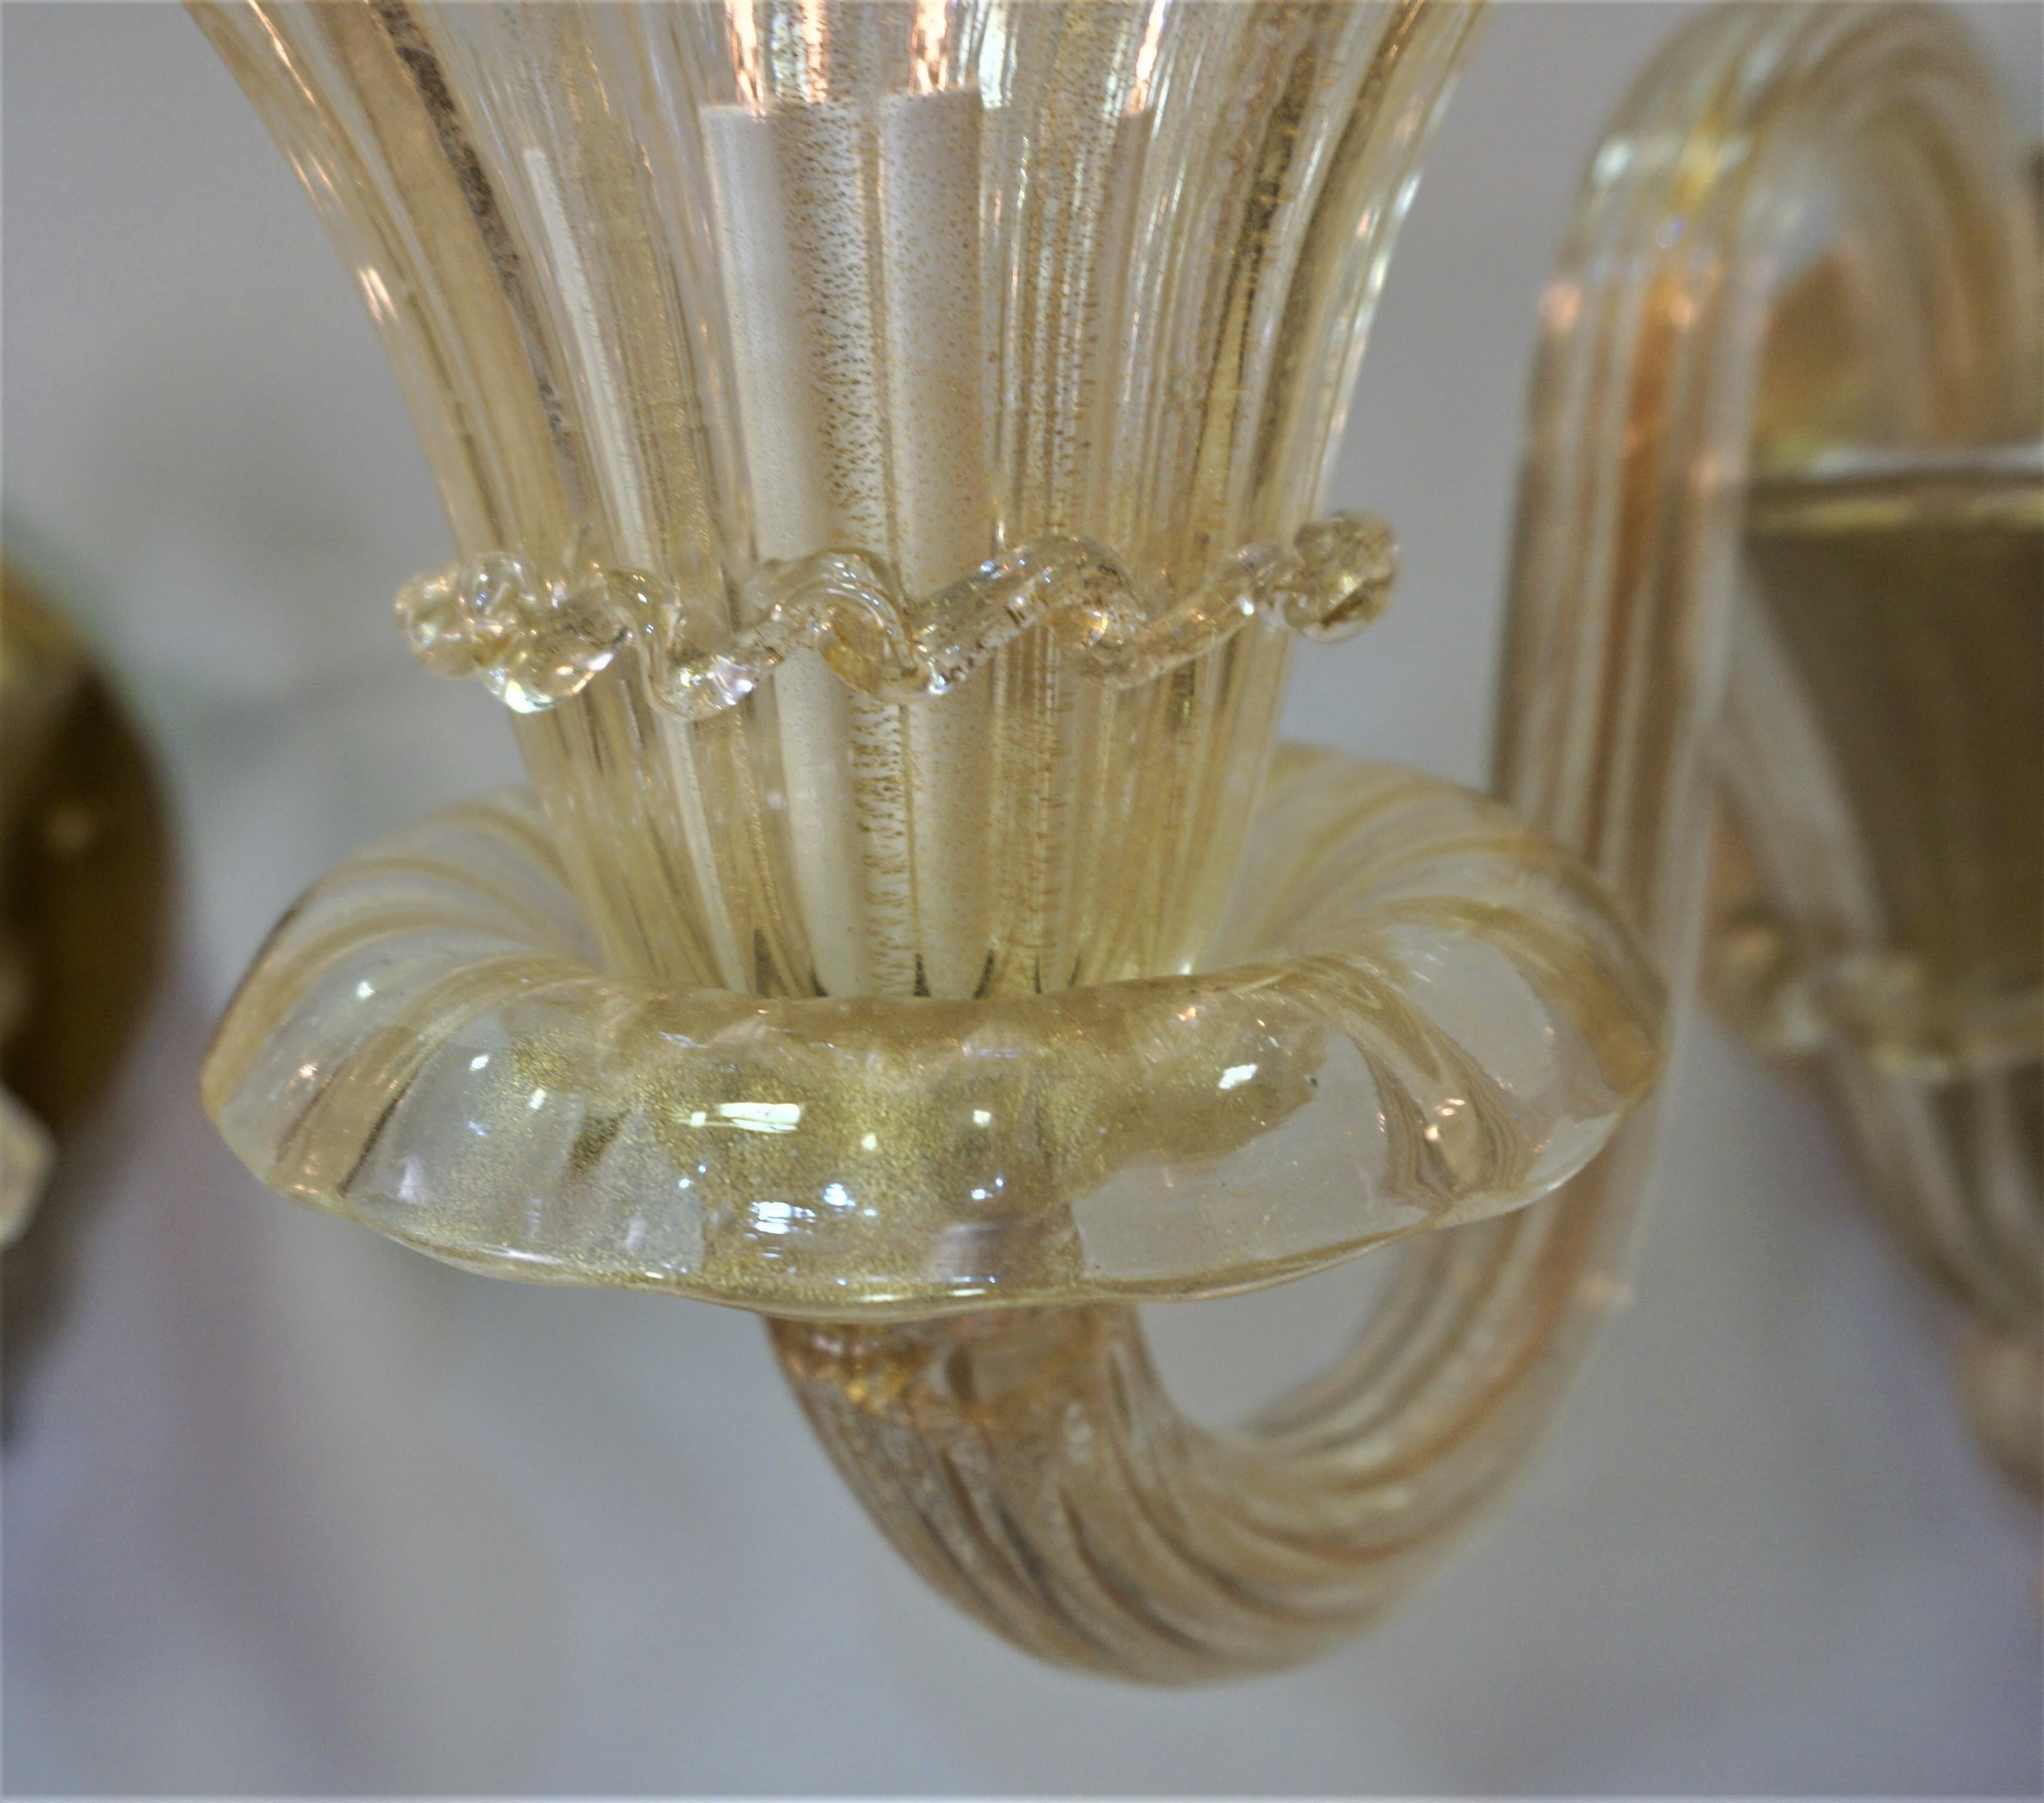 Pair of Classic Design Murano Glass Wall Sconces In Good Condition For Sale In Fairfax, VA